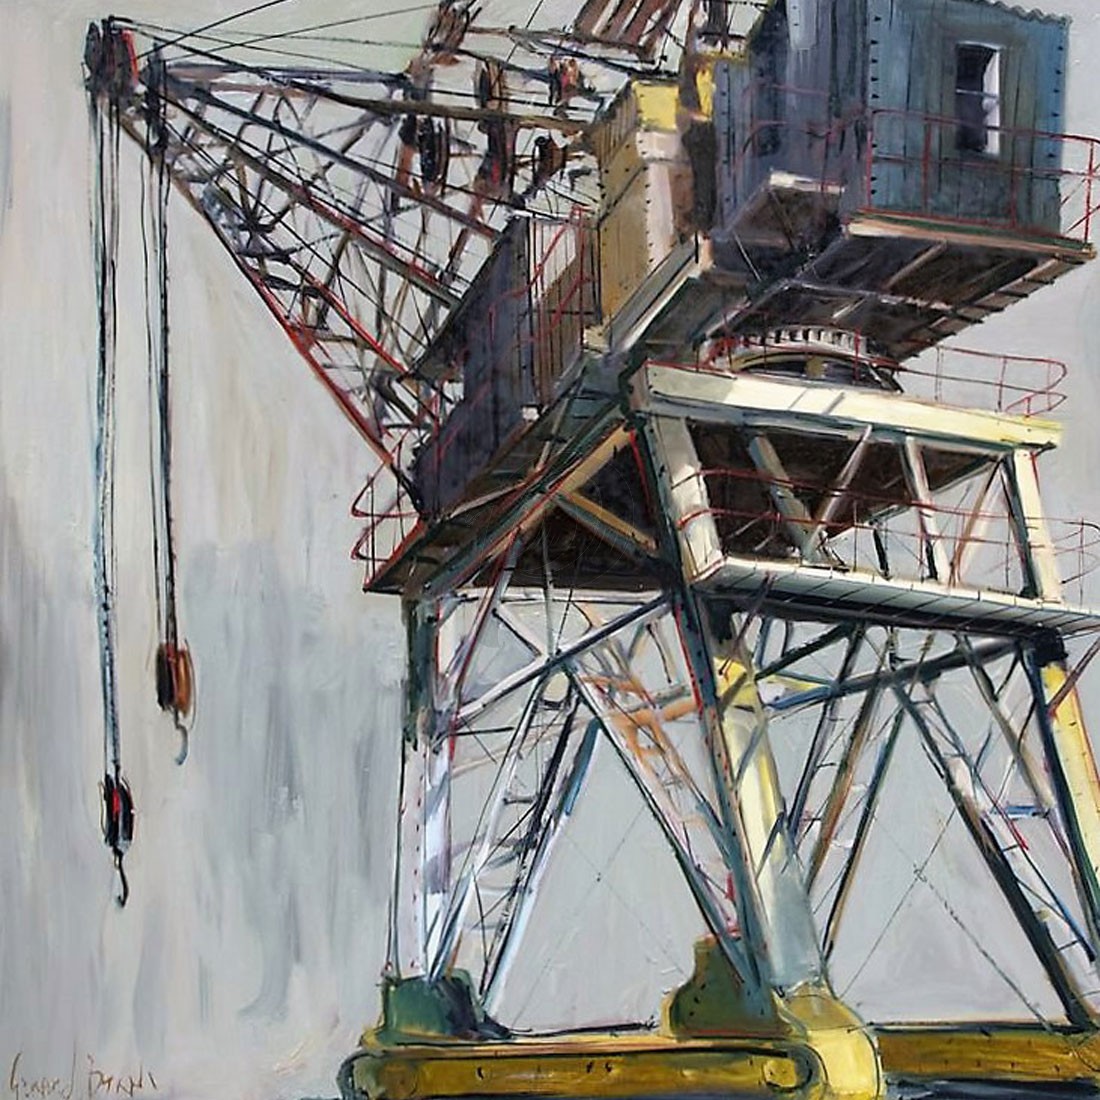 Gerard Byrne - Lever Crane (Hand-Painted Reproduction)